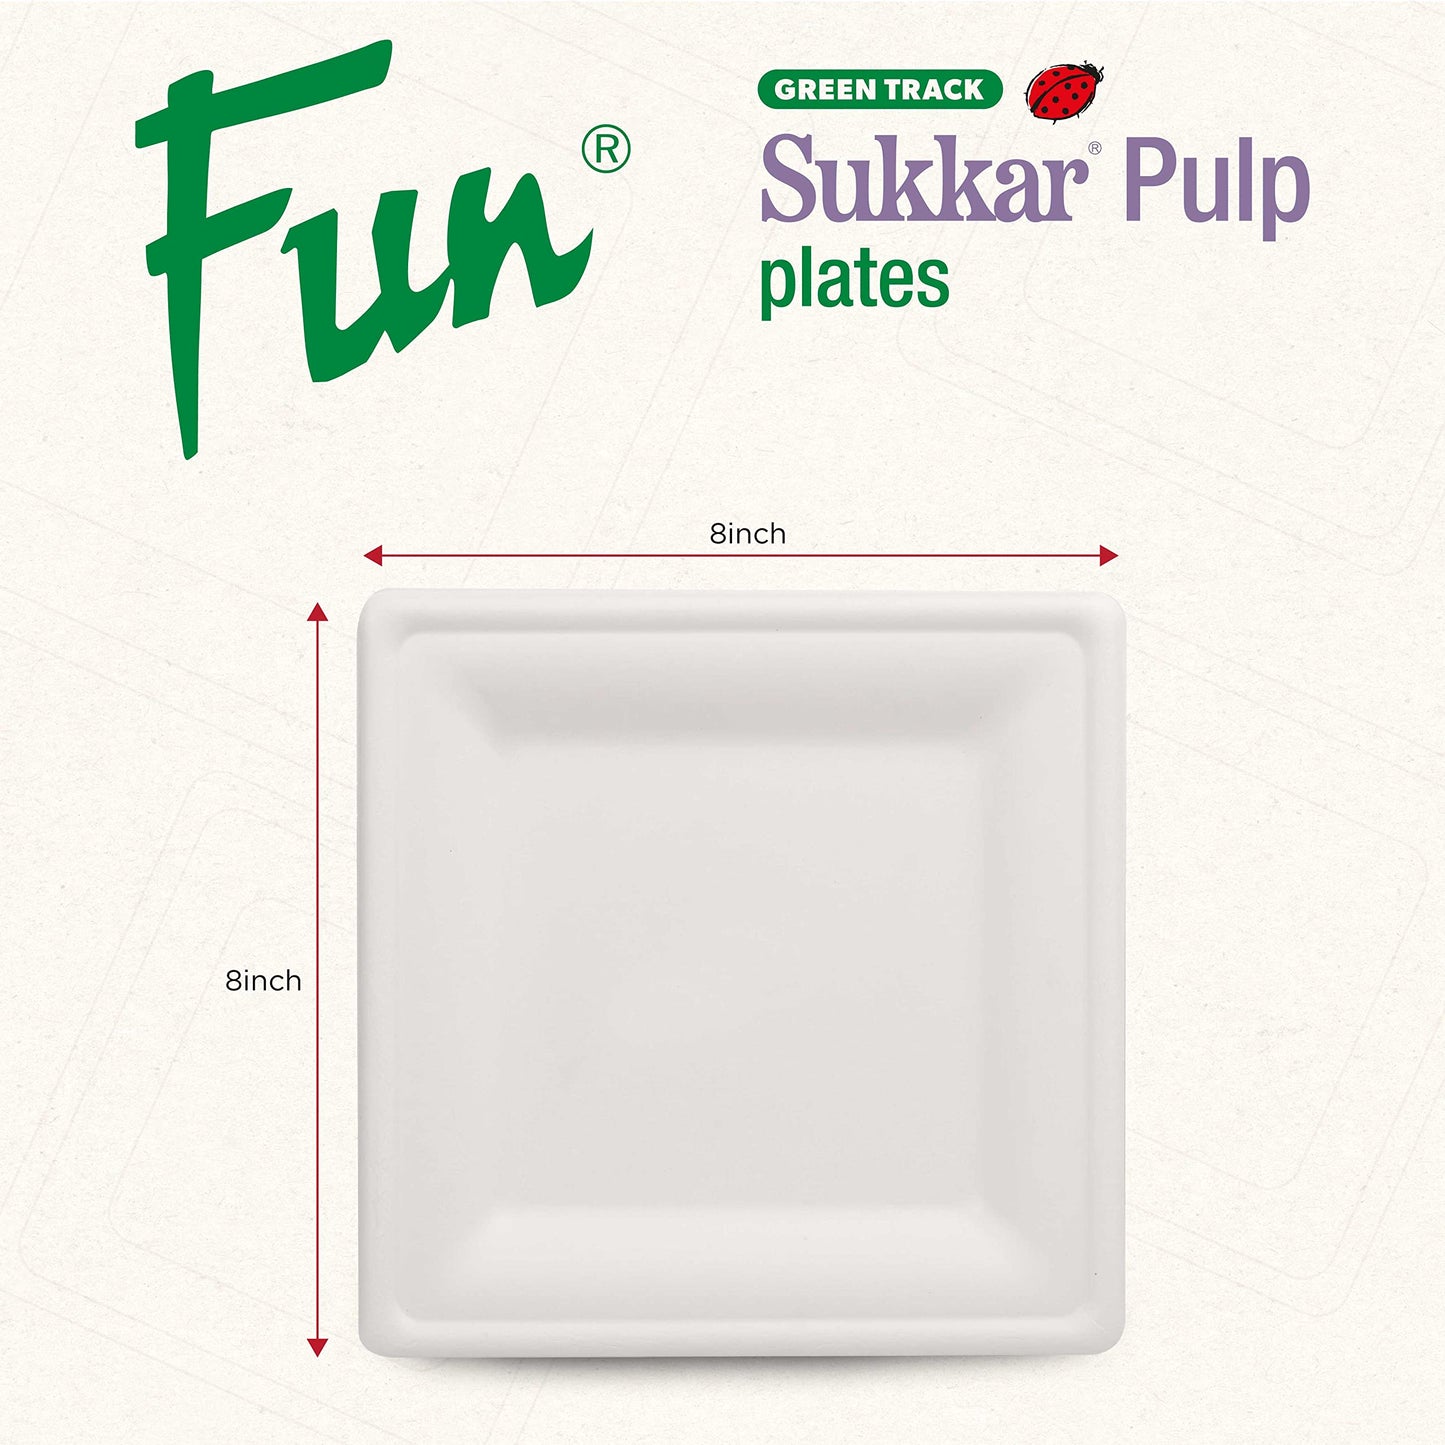 Fun Sukkar Pulp Square Plate 8x8 inch Eco-Friendly Disposable Dinnerware white for party, Camping,Compostable,Recyclable and biodegradable Picnic Plates (Pack of 10)